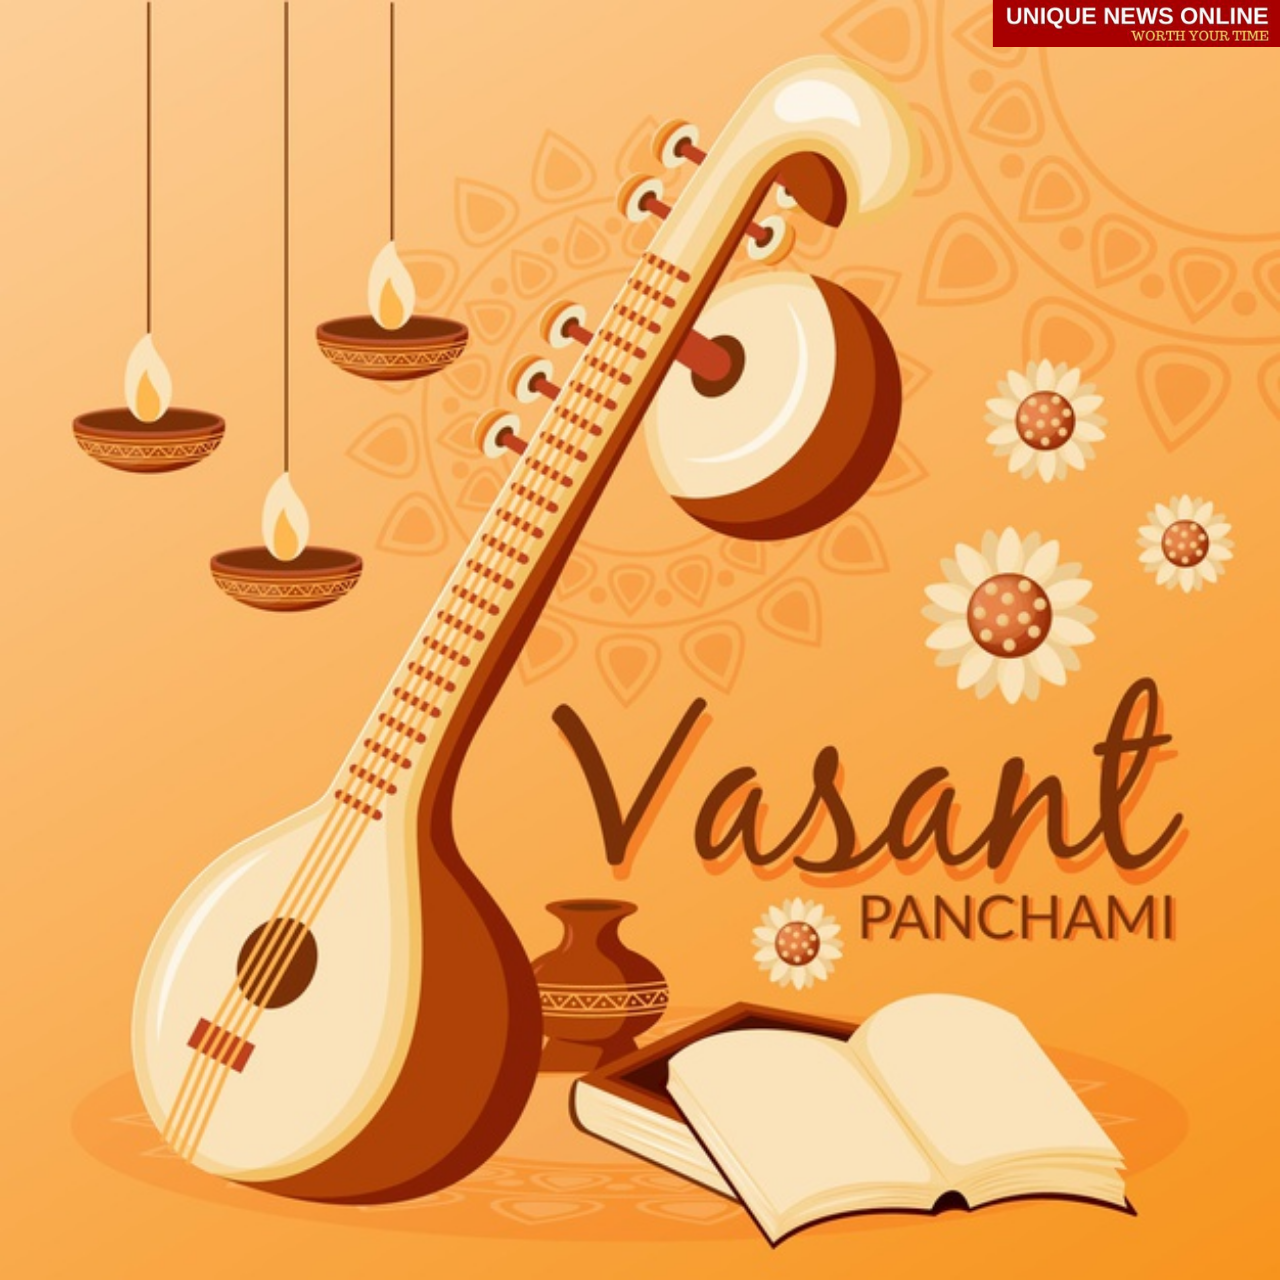 Happy Basant Panchami 2021: Wishes, Greetings, Messages and Quotes to share